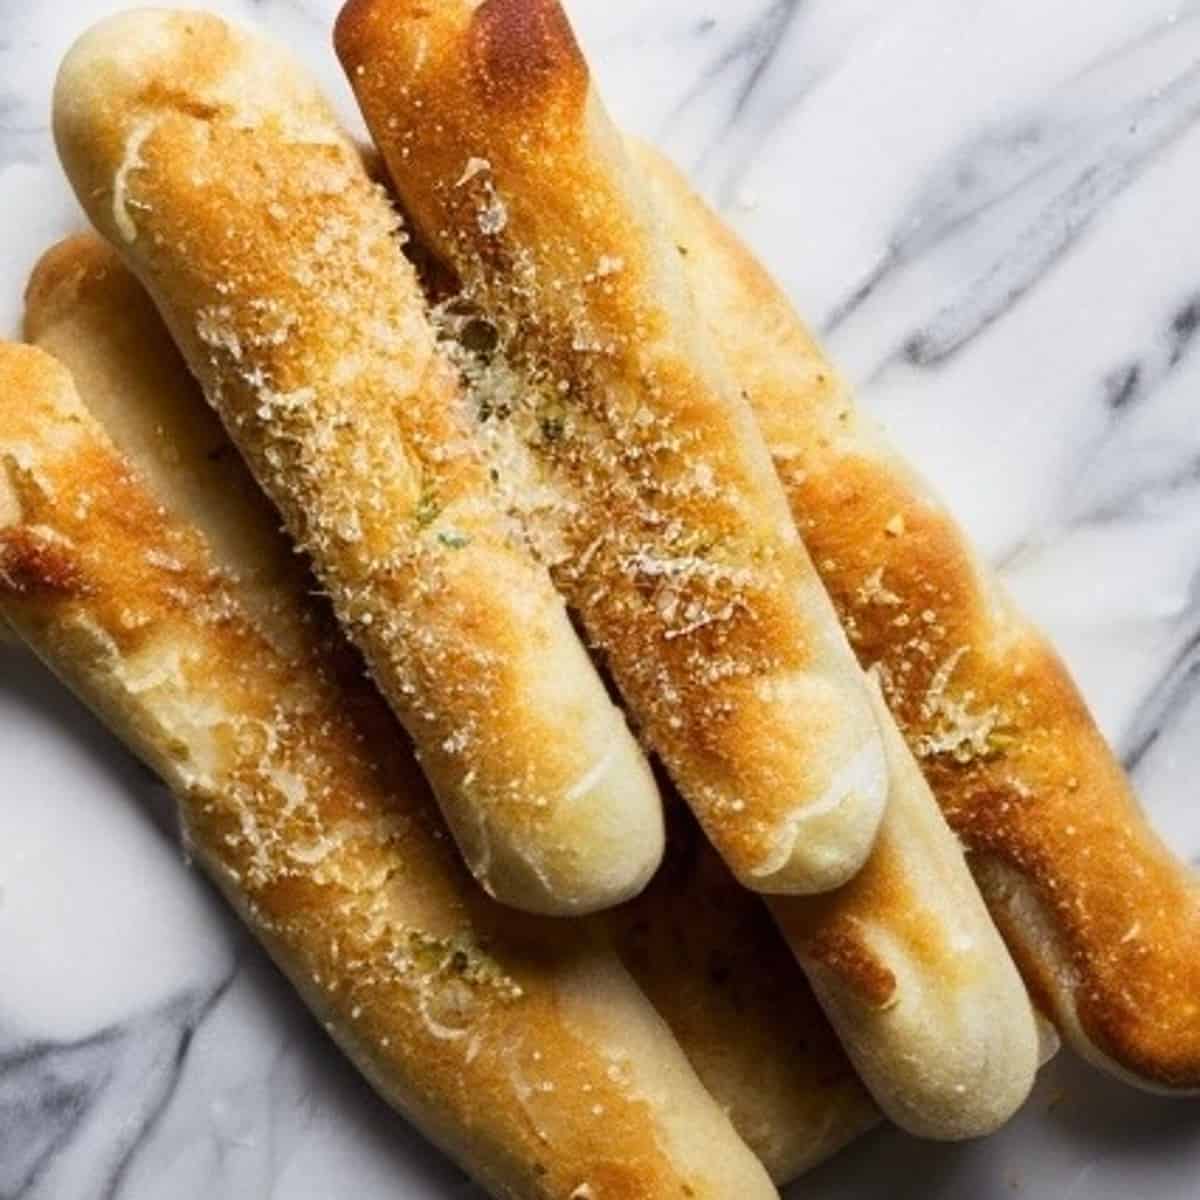 A close-up photo of several gluten-free breadsticks on a white plate. The breadsticks are long and thin, with a golden brown color and a slightly irregular, rustic appearance. They are arranged vertically on the plate, and some are slightly bent or leaning against each other. There are a few small crumbs scattered on the plate around the breadsticks.